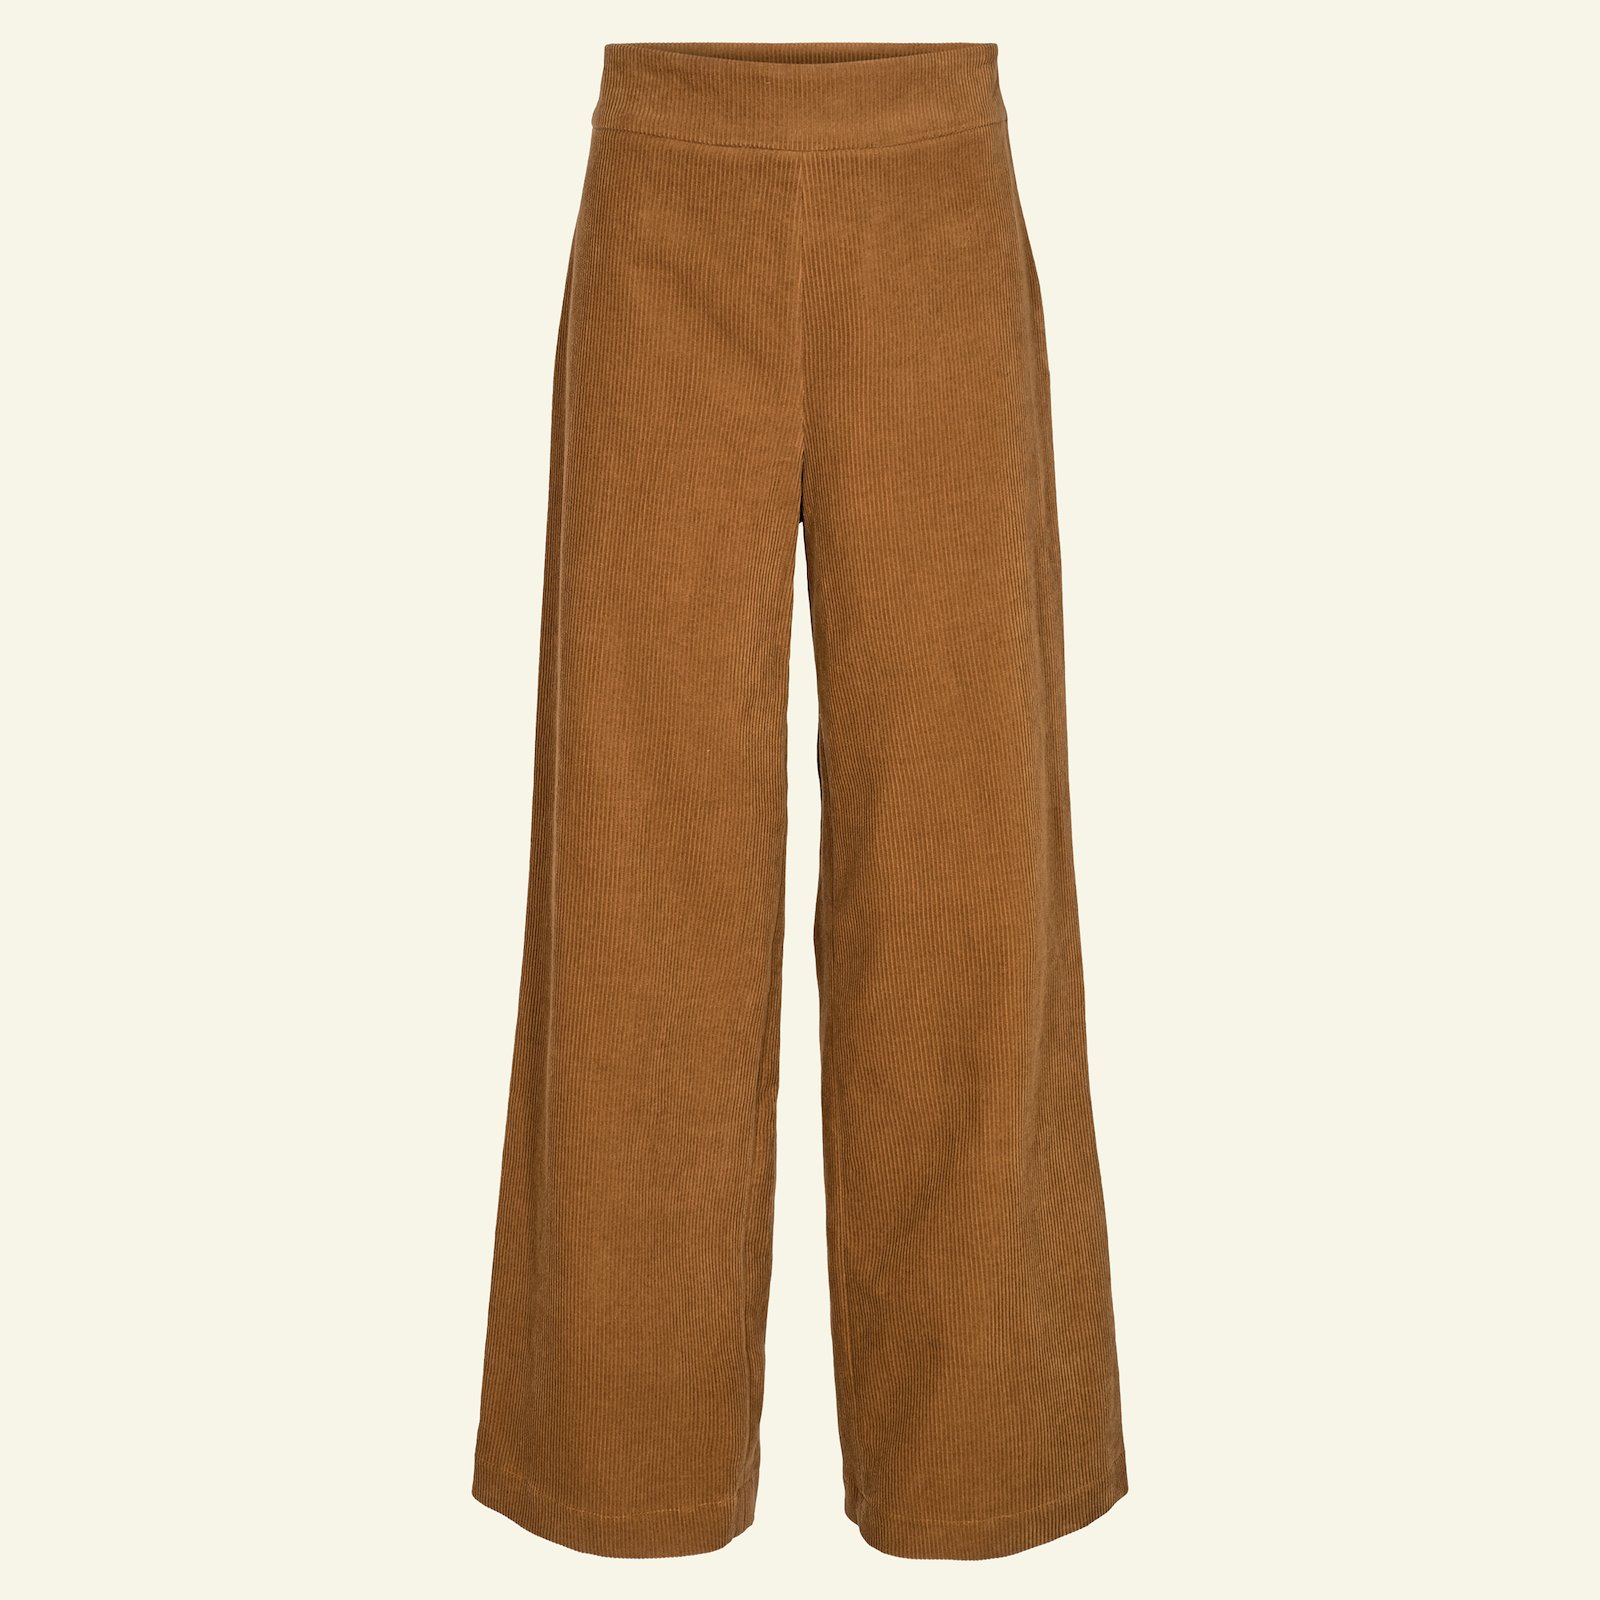 Highwaist and wide legs trousers, 46/18 p20052_430810_sskit